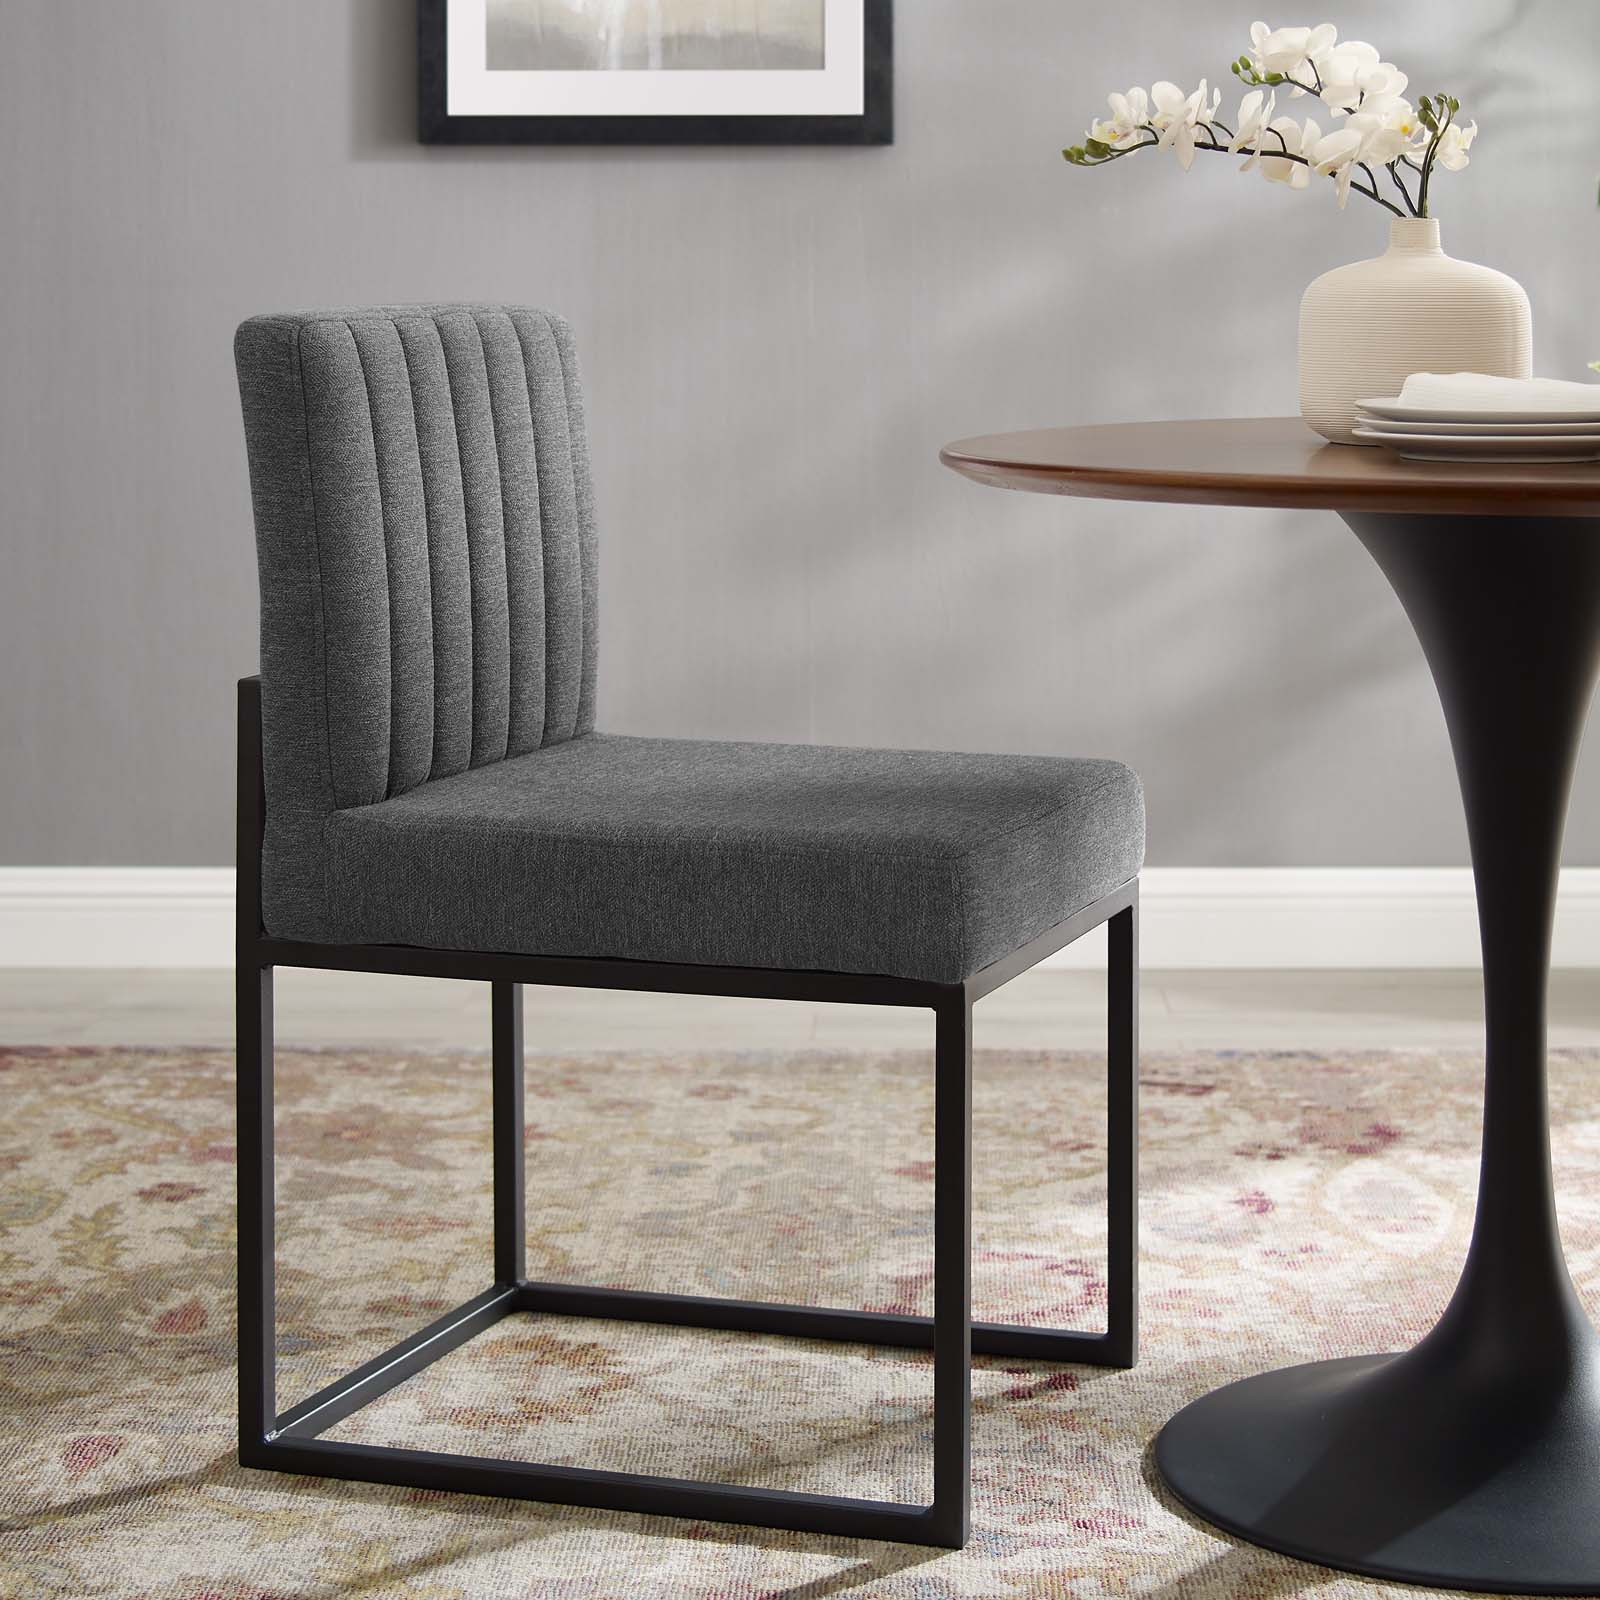 Modway Dining Chairs - Carriage Channel Tufted Sled Base Upholstered Fabric Dining Chair Black Charcoal